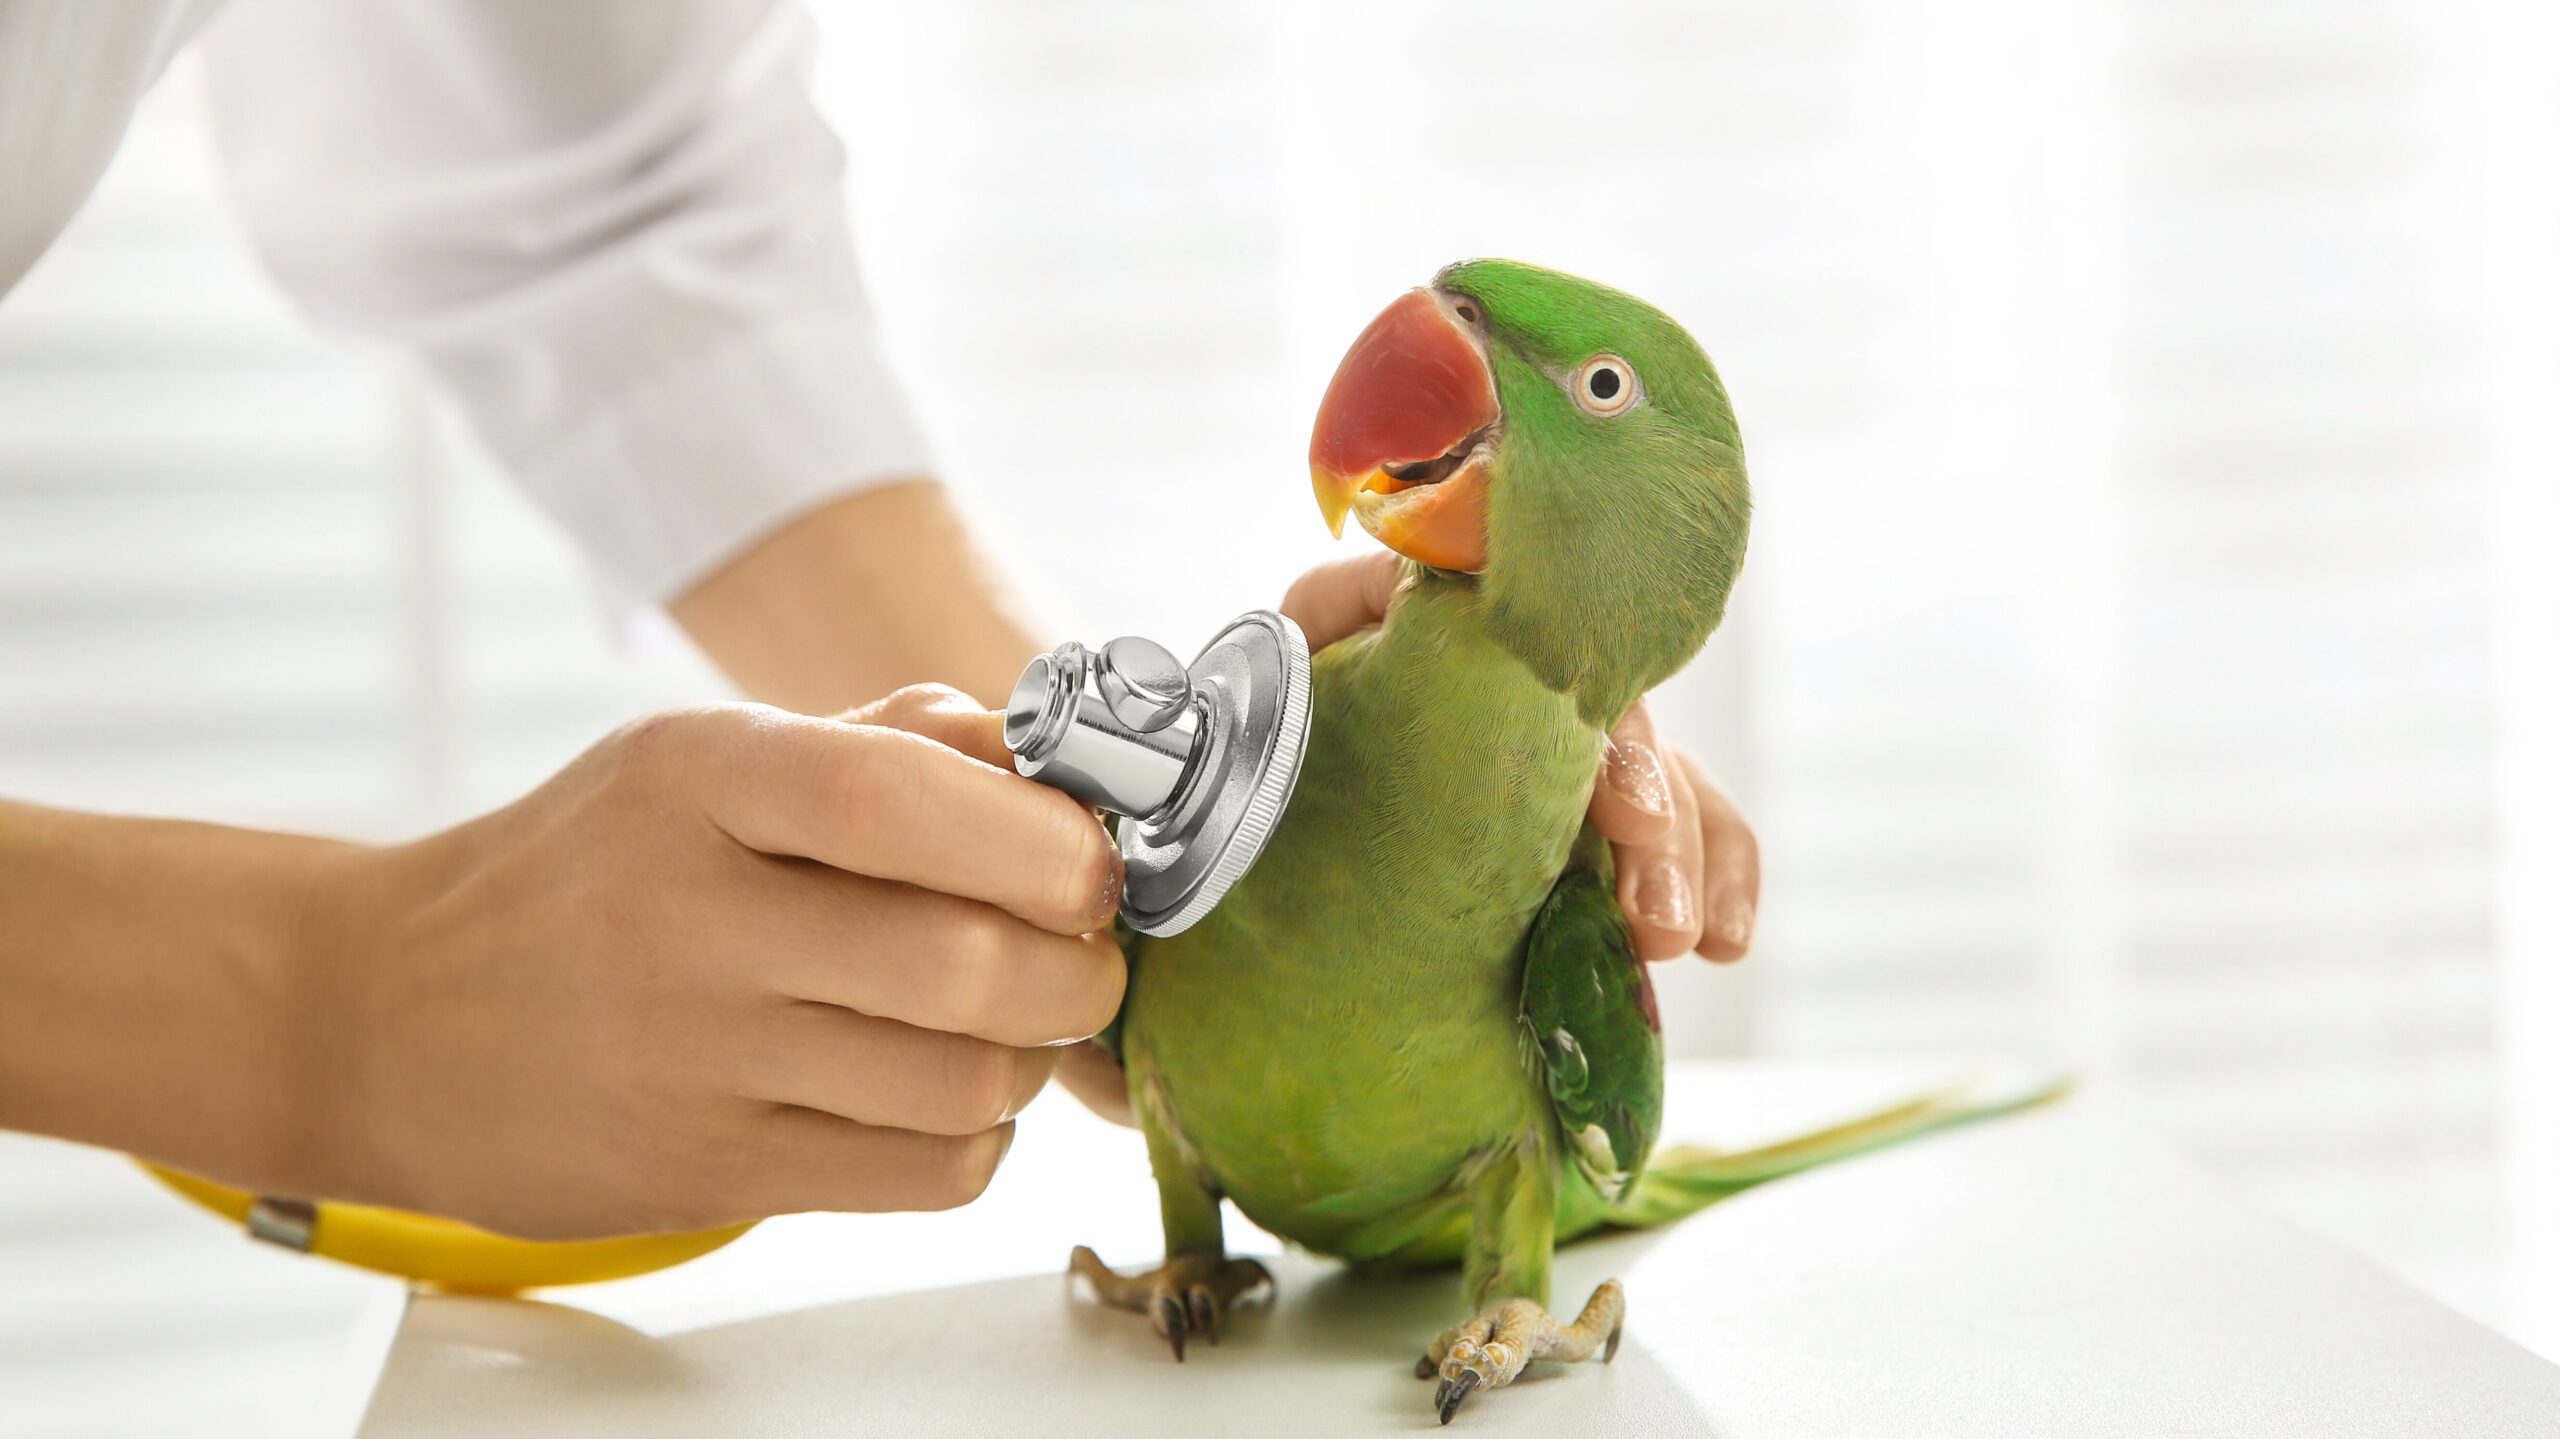 Just like any other beloved pet, birds are susceptible to health issues and accidents - that's where pet insurance steps in.